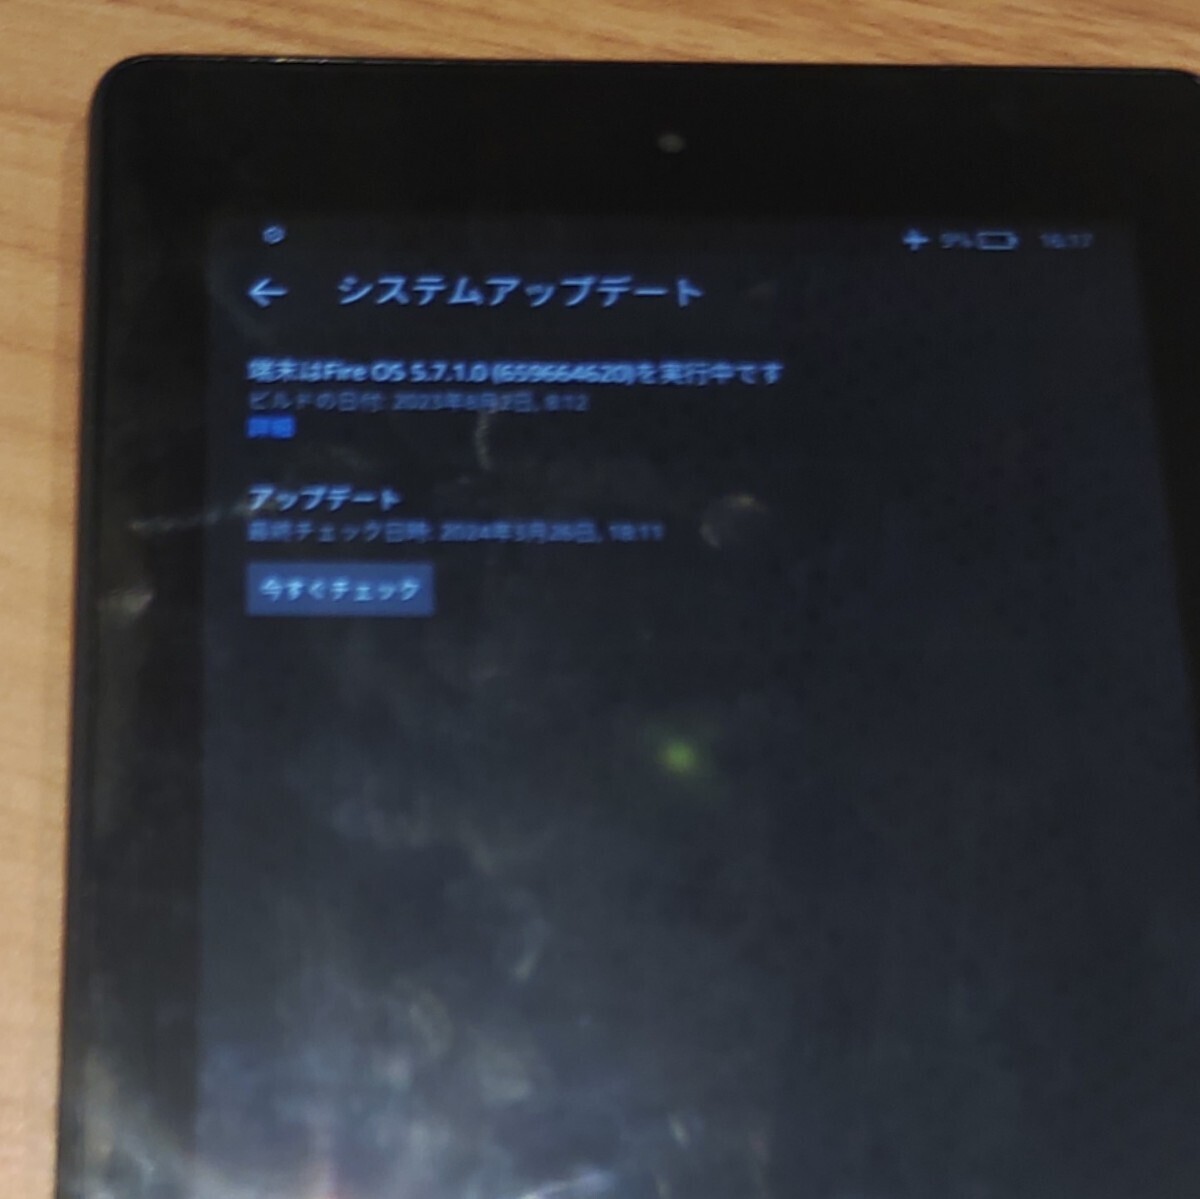 Fire 7 第7世代 amazon kindle 7インチTablet 電子書籍端末 youtube Fire OS 5.7.1.0 SNS,ネット